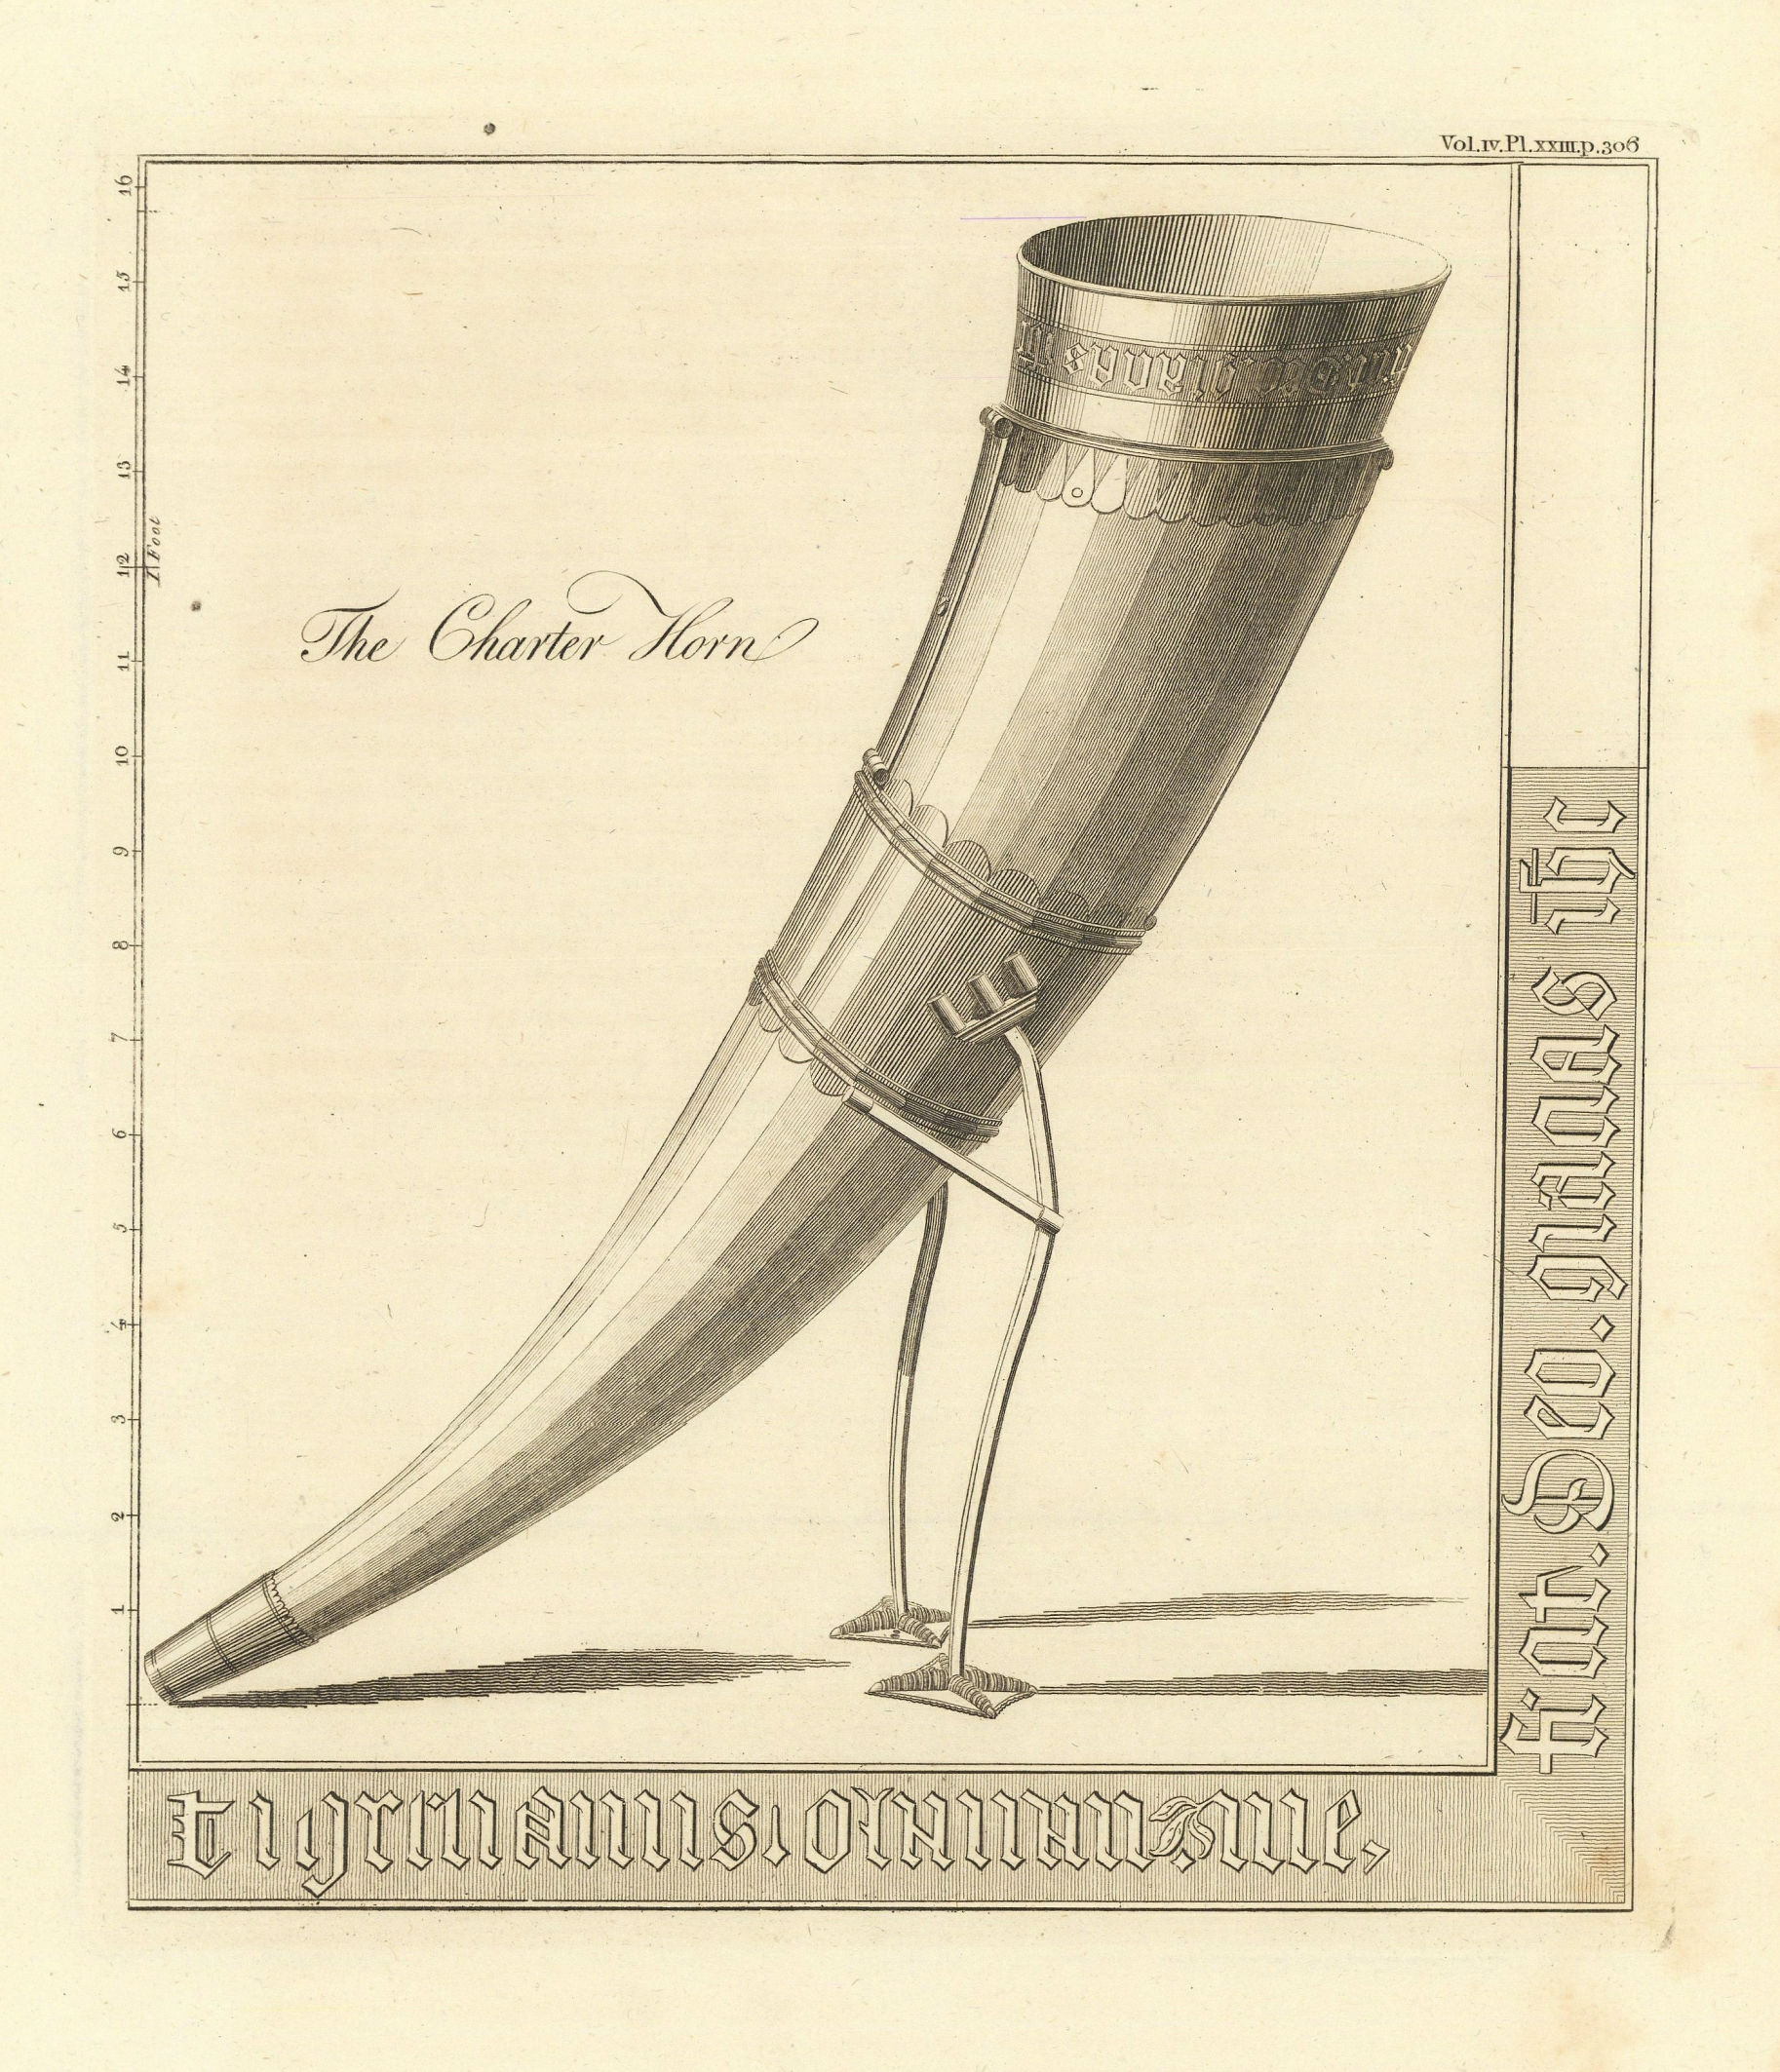 Associate Product The Kavanagh Charter Horn. Ceremonial drinking horn 1806 old antique print